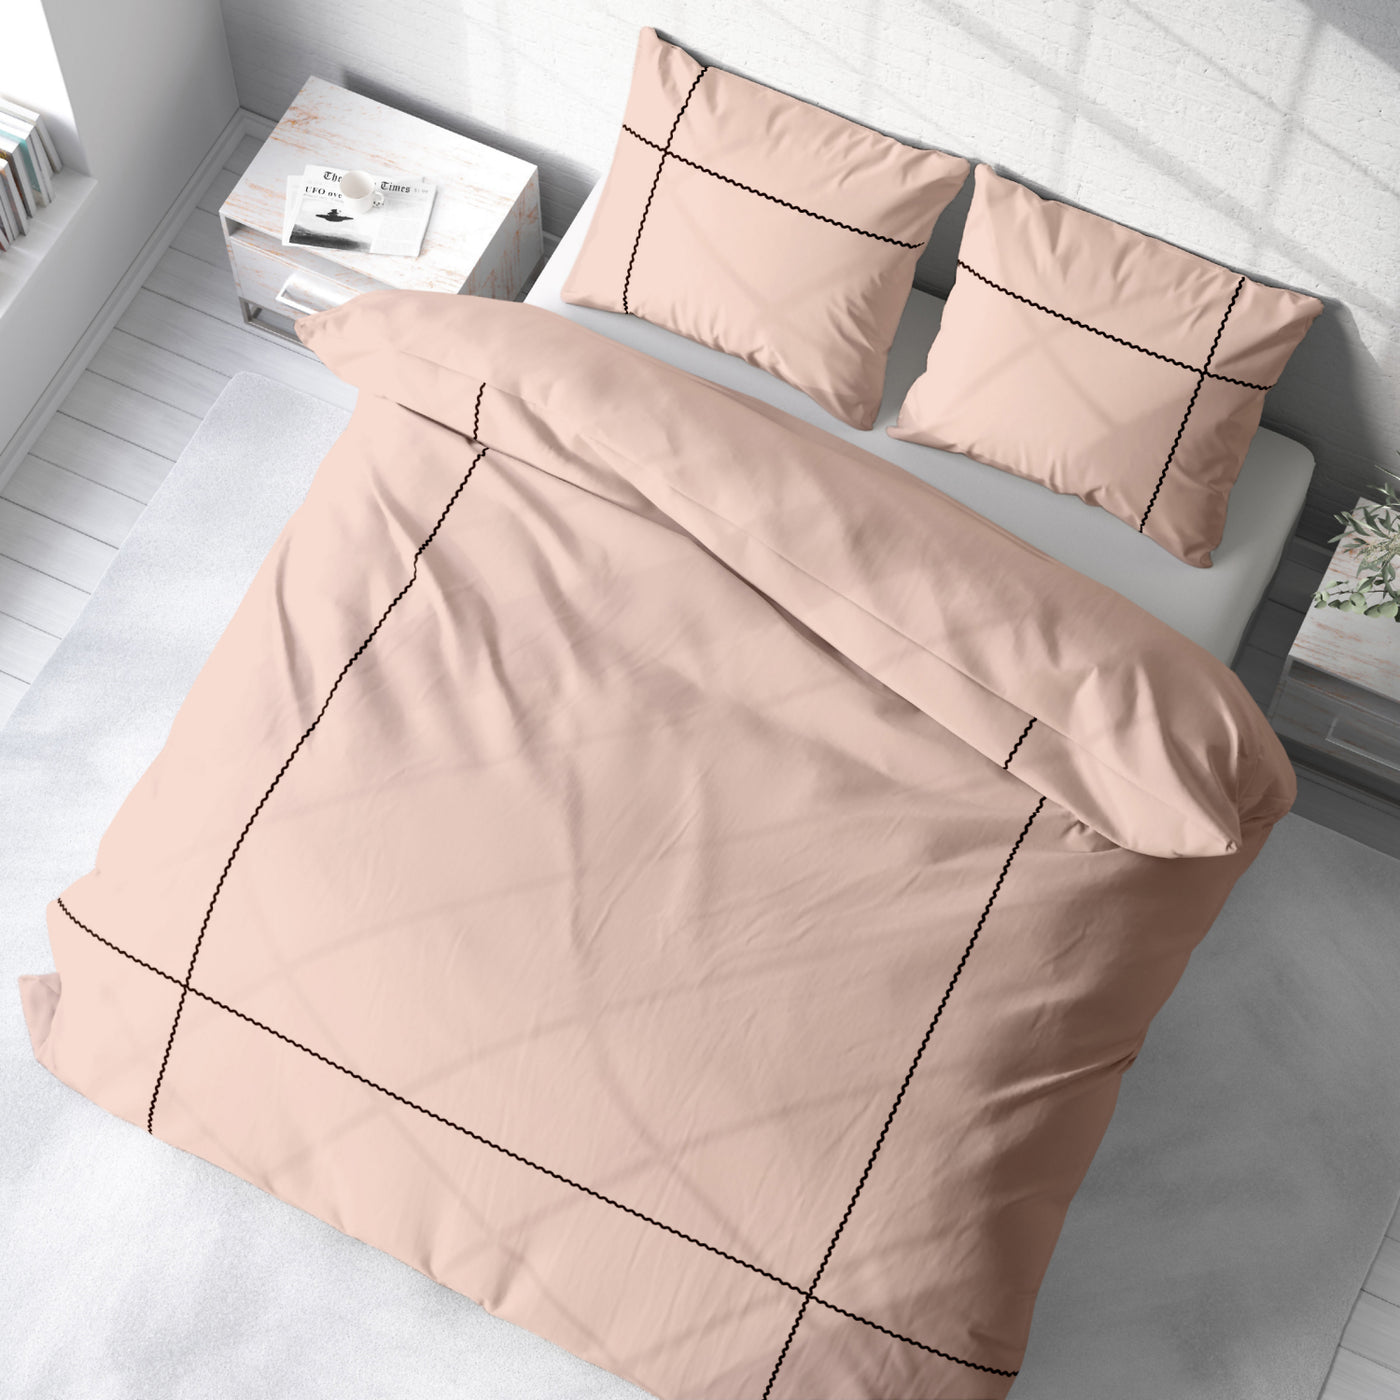 Luxe Geo 3 Piece Duvet Cover Set 100% Egyptian Cotton 600 Thread Count